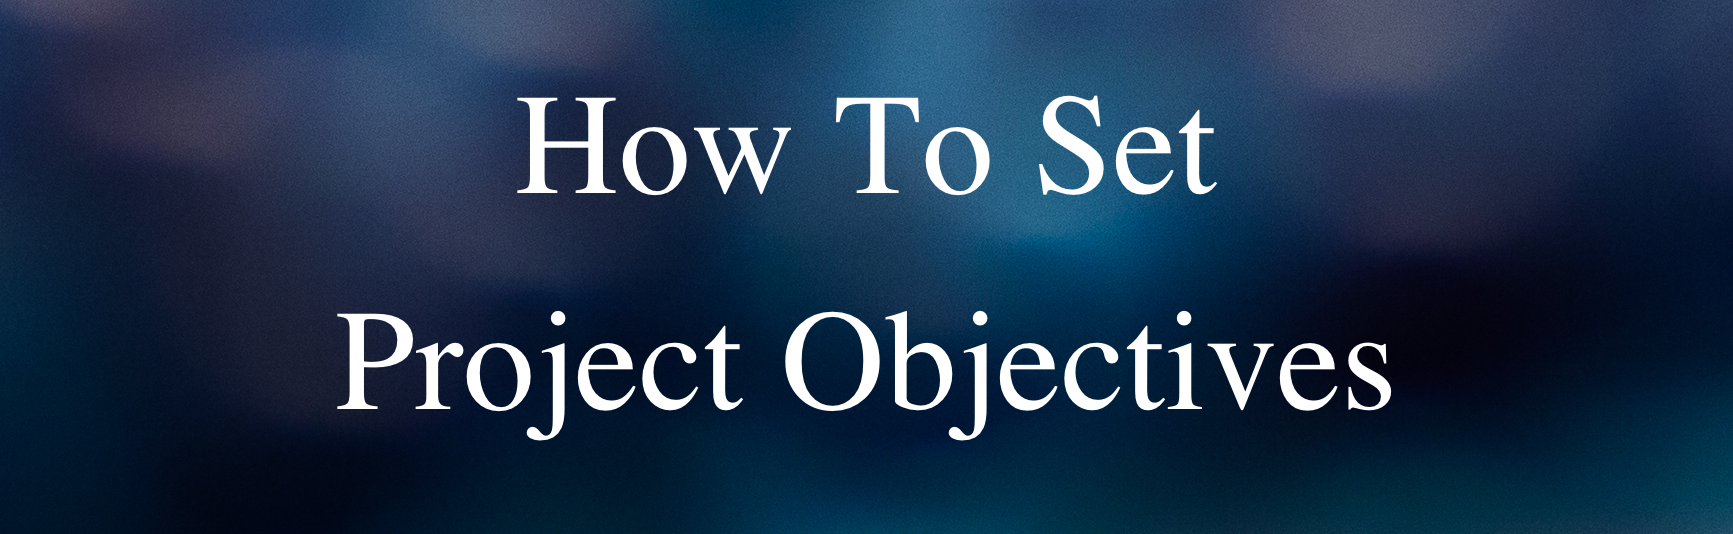 How To Set Project Objectives